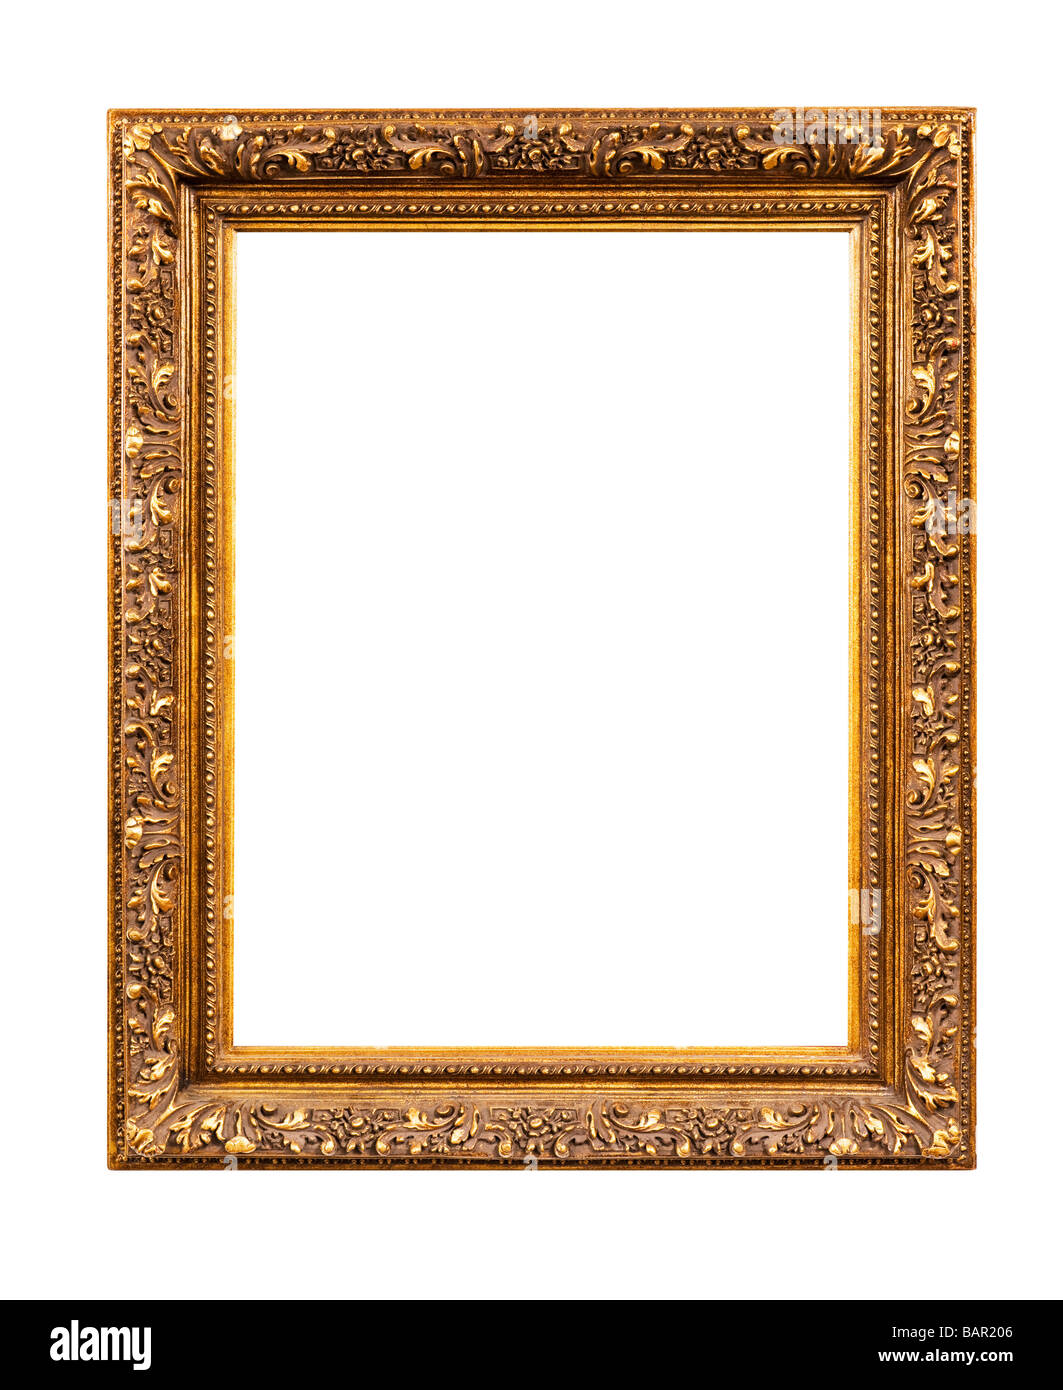 Ornate wooden picture frame Stock Photo